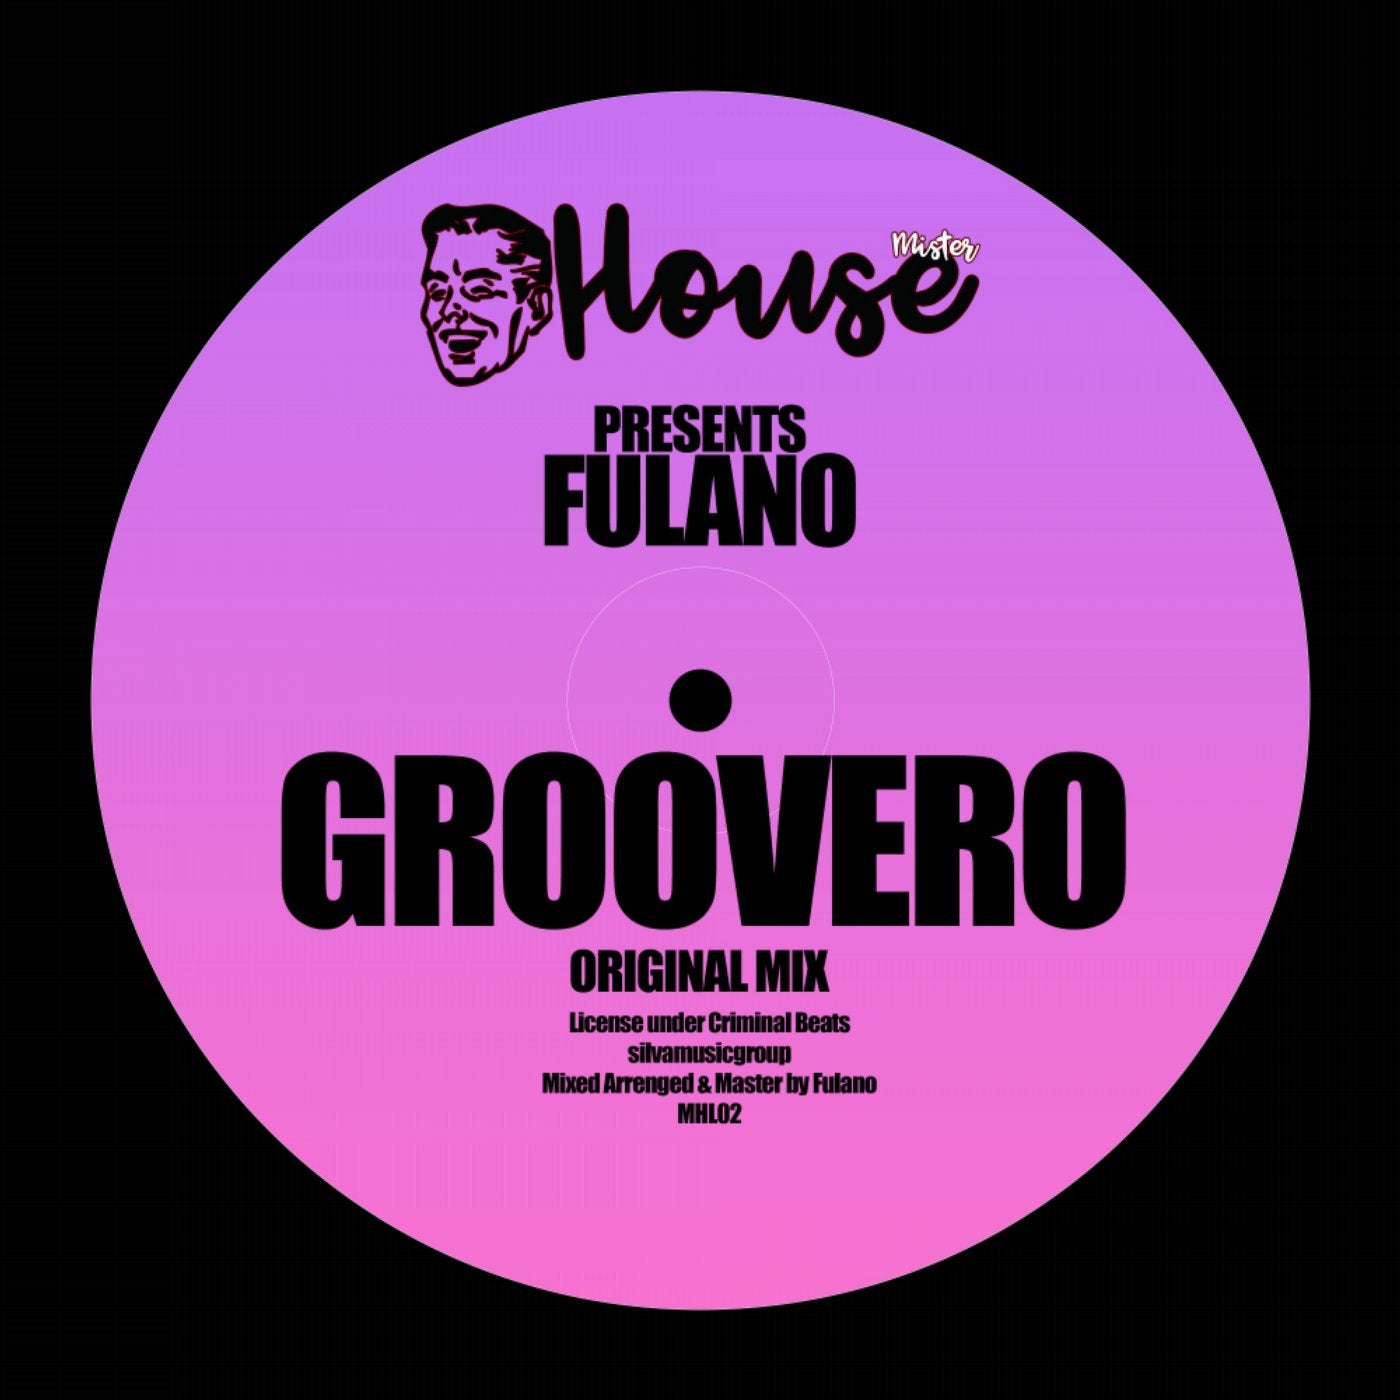 Groovero (Original Mix) by Fulano on Beatport